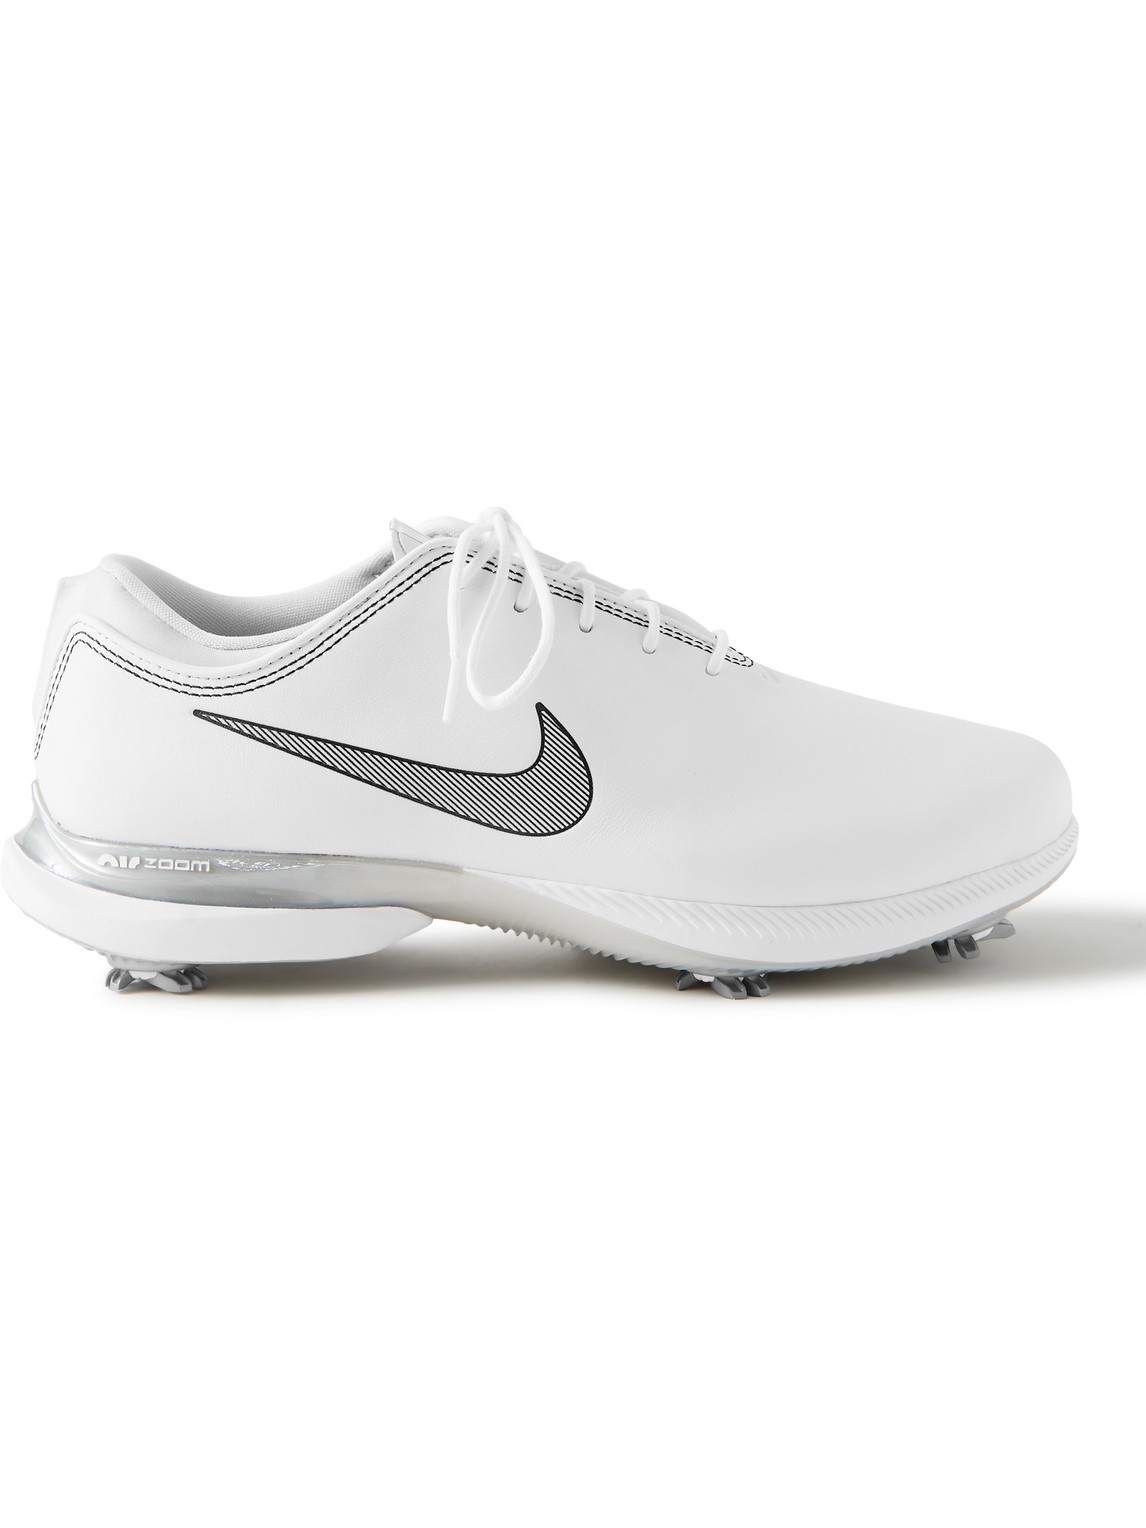 NIKE AIR ZOOM VICTORY TOUR 2 LEATHER GOLF SHOES